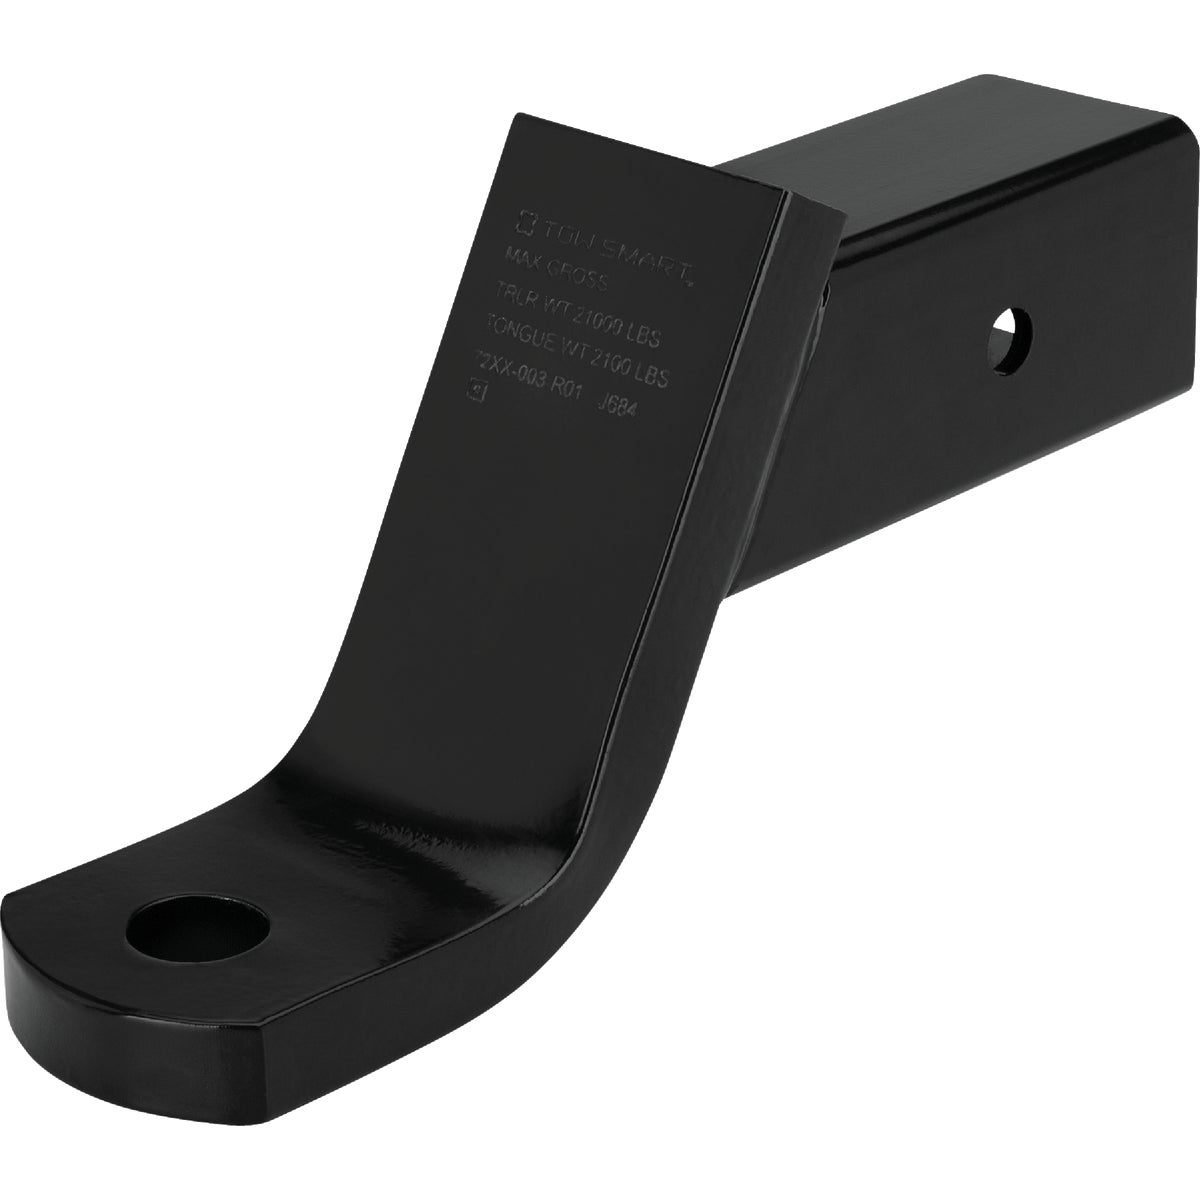 Item 570237, The Class V Standard Trailer Hitch Ball Mount is a receiver hitch accessory